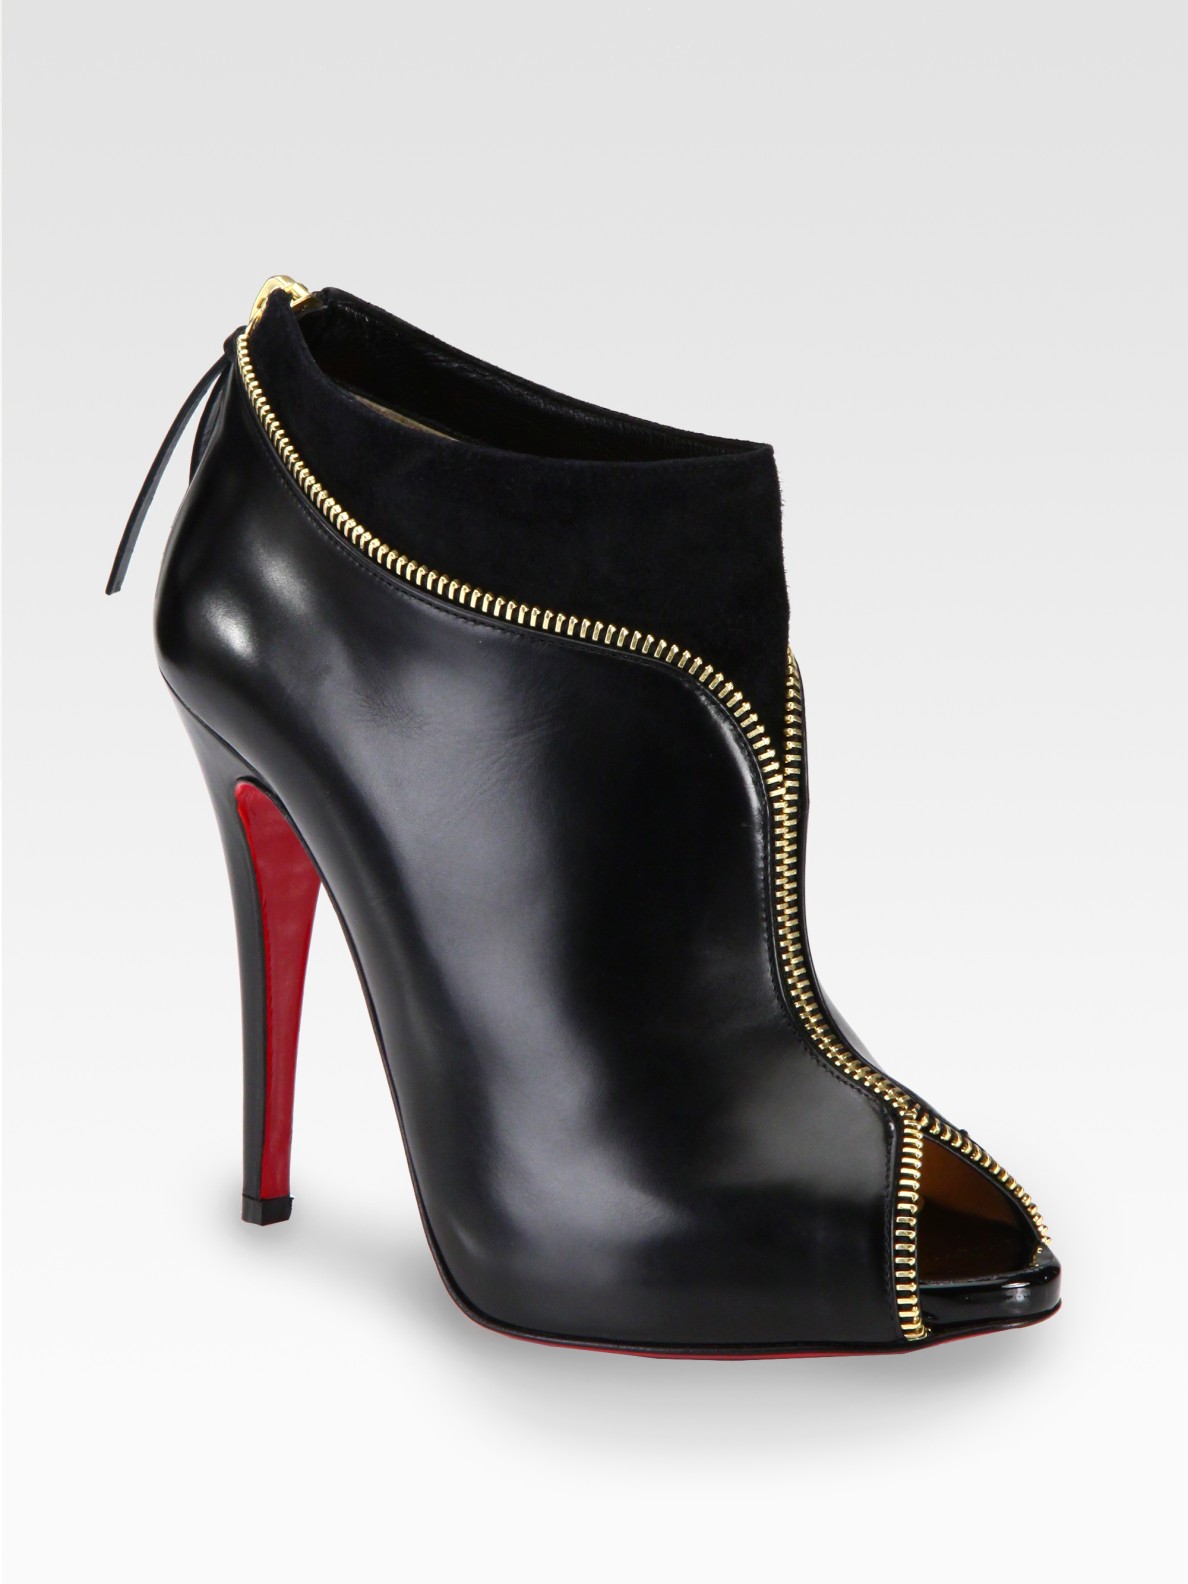 Christian Louboutin Leather and Suede Zipper Ankle Boots in | Lyst